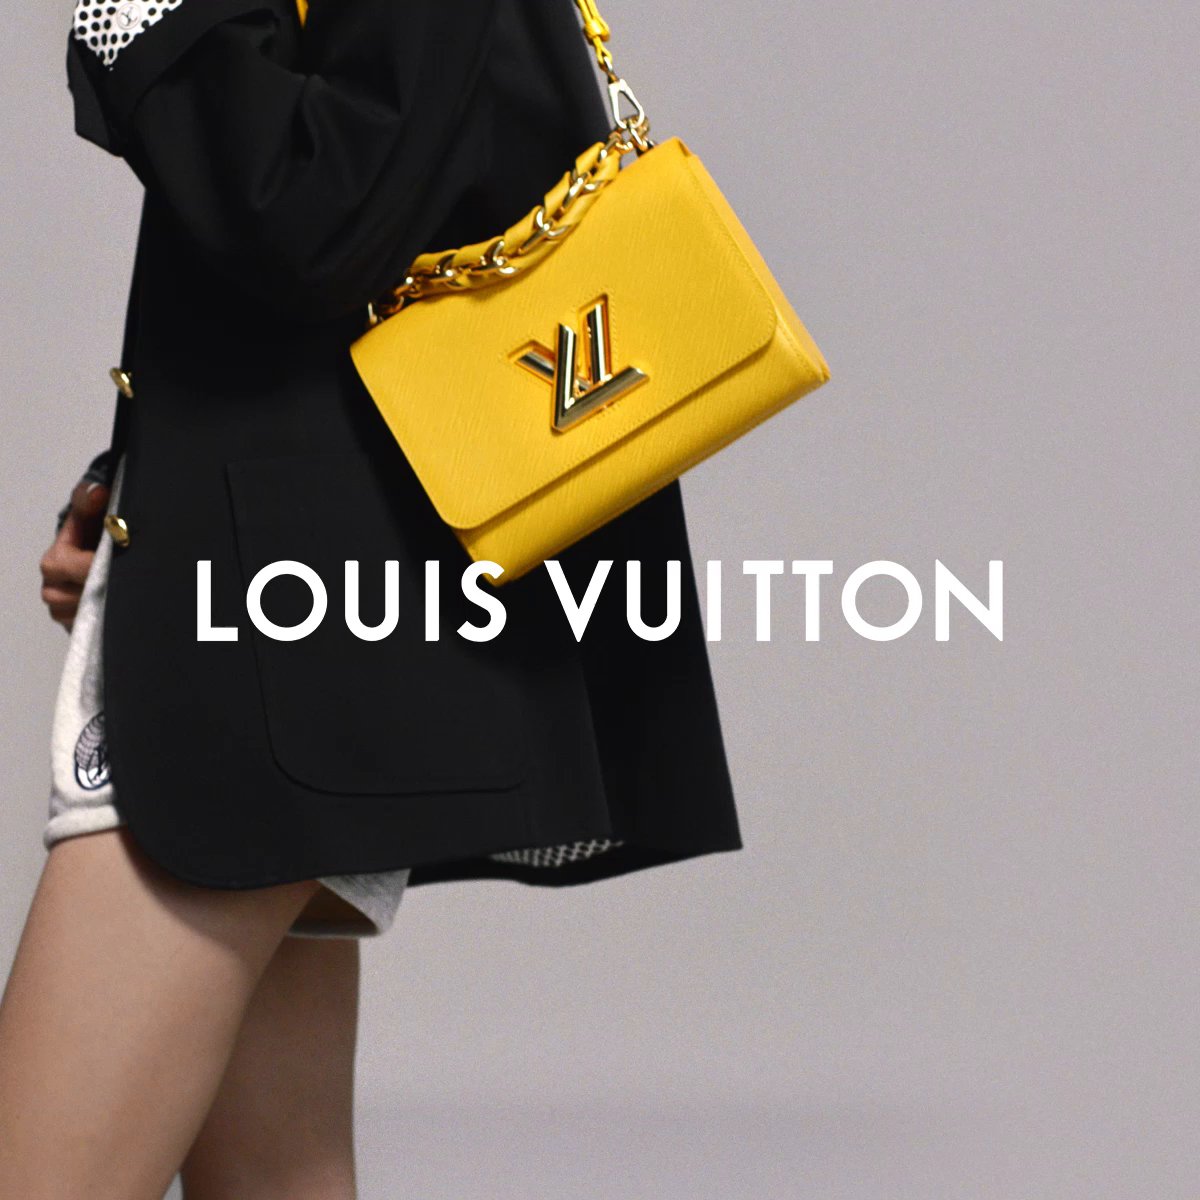 Louis Vuitton on X: #jhope joins as new #LouisVuitton House Ambassador.  The Maison is delighted to welcome the South Korean artist, who brings his  unique charm and style to this exciting new